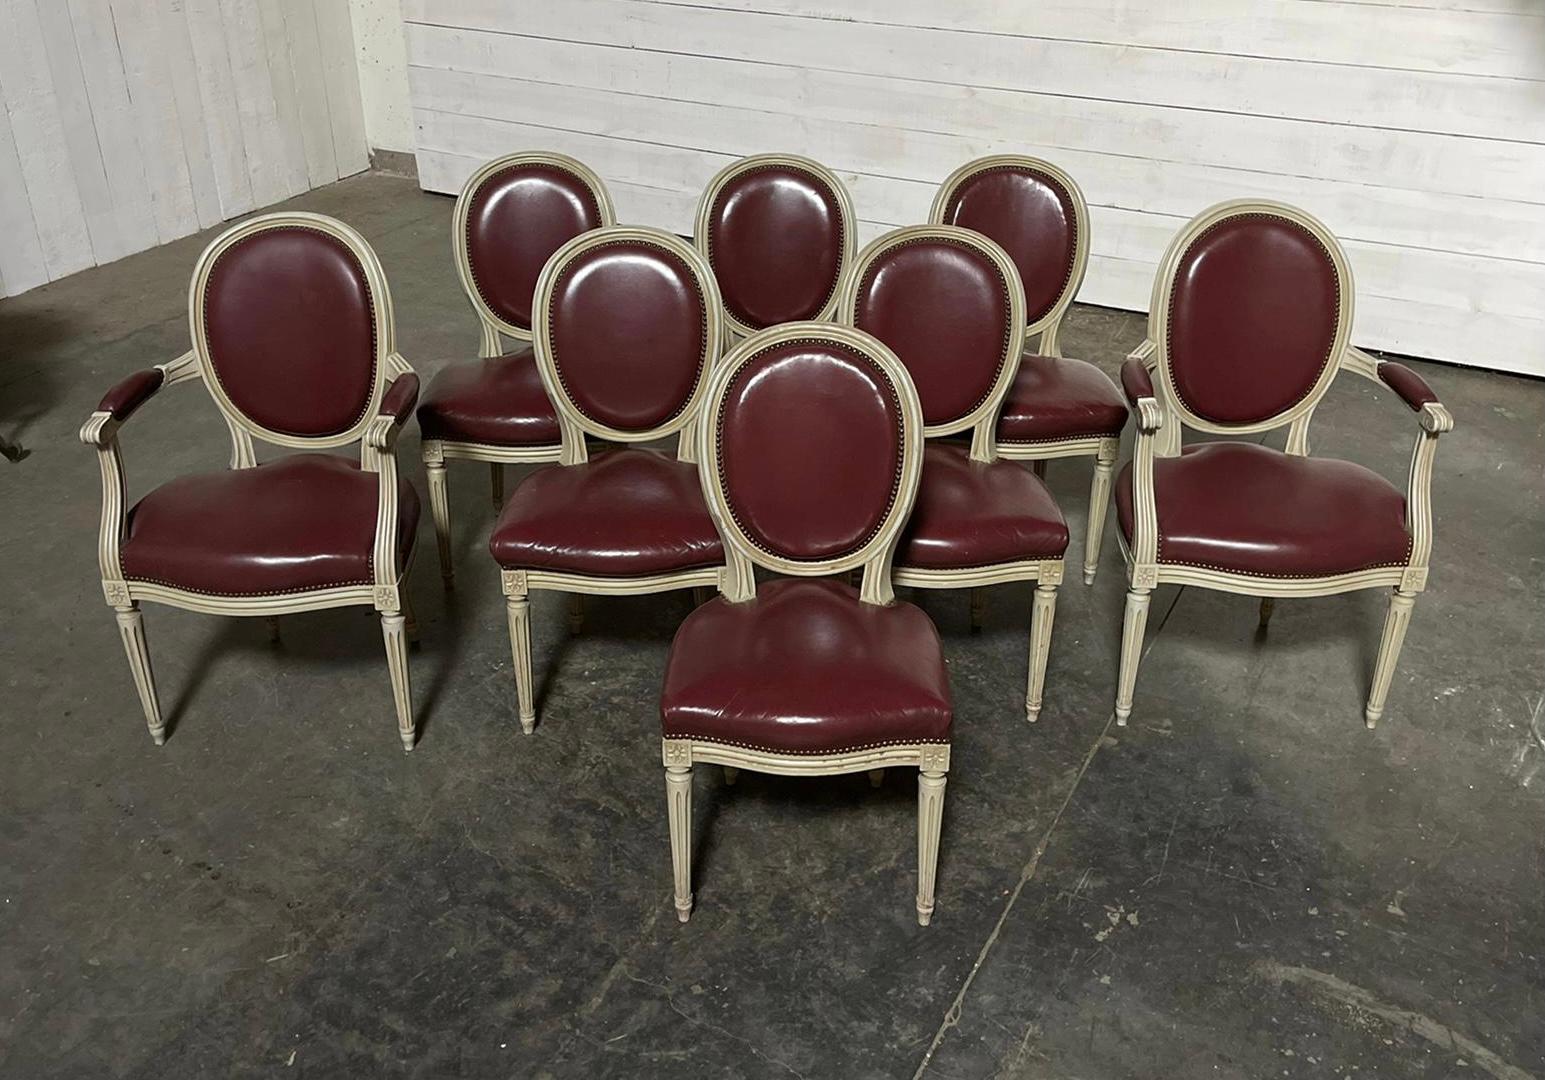 A lovely set of 8 French dining chairs, having original off white finish and original leather upholstery which is in very good condition, of course you may want to take it off and re upholster in a fabric of your choice. The sprung internal seats